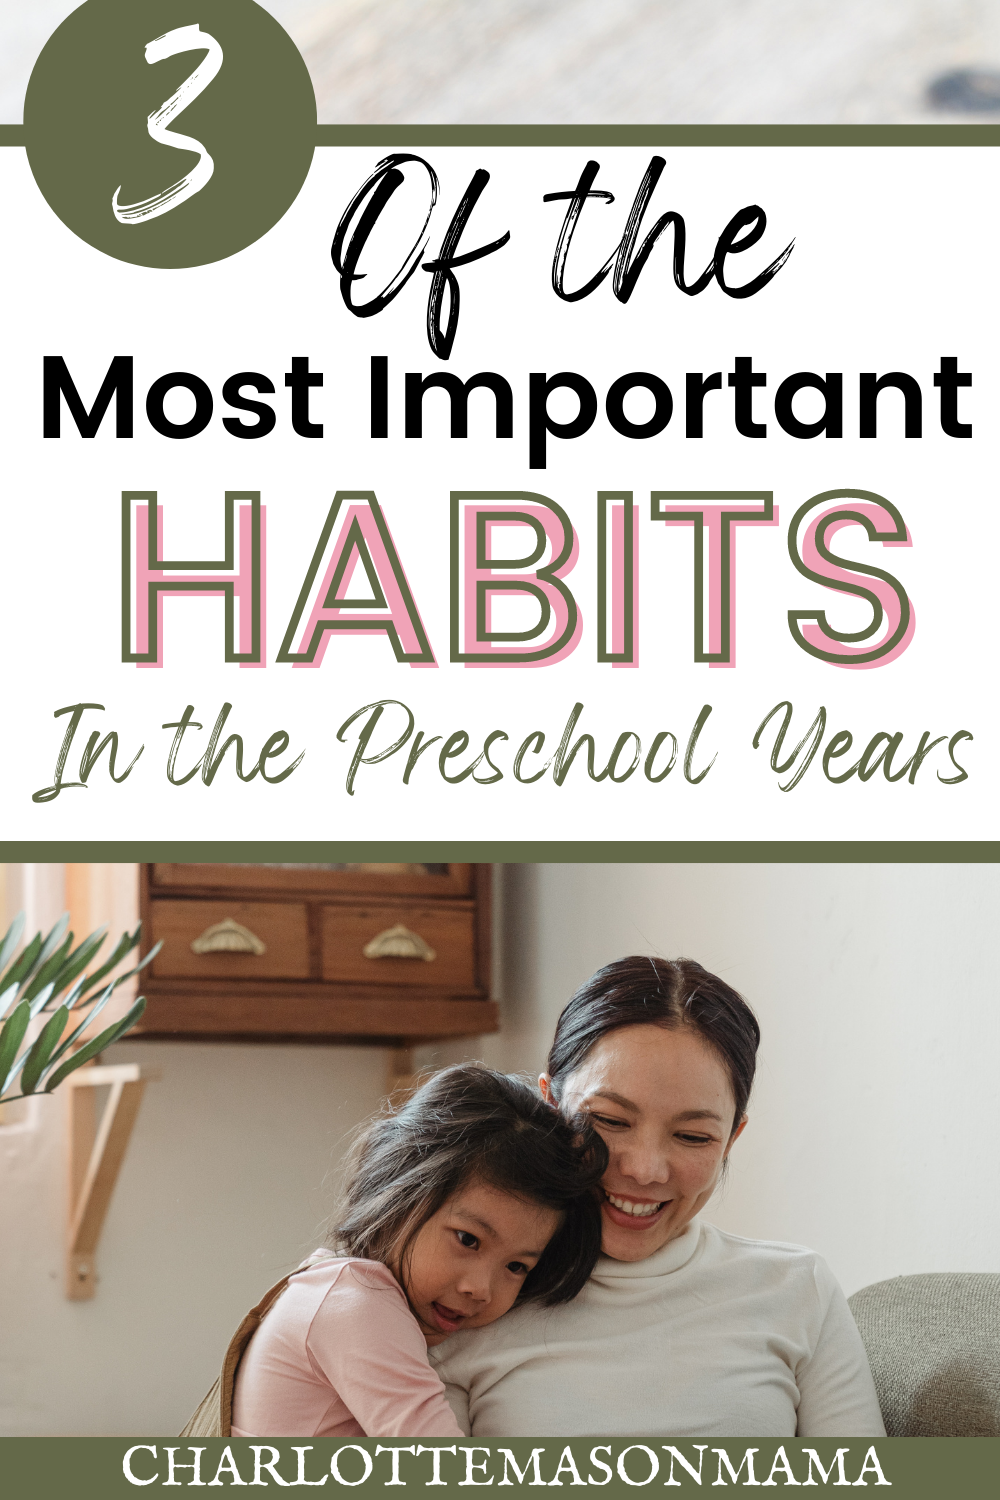 Three of the Most Important Habits in the Preschool Years